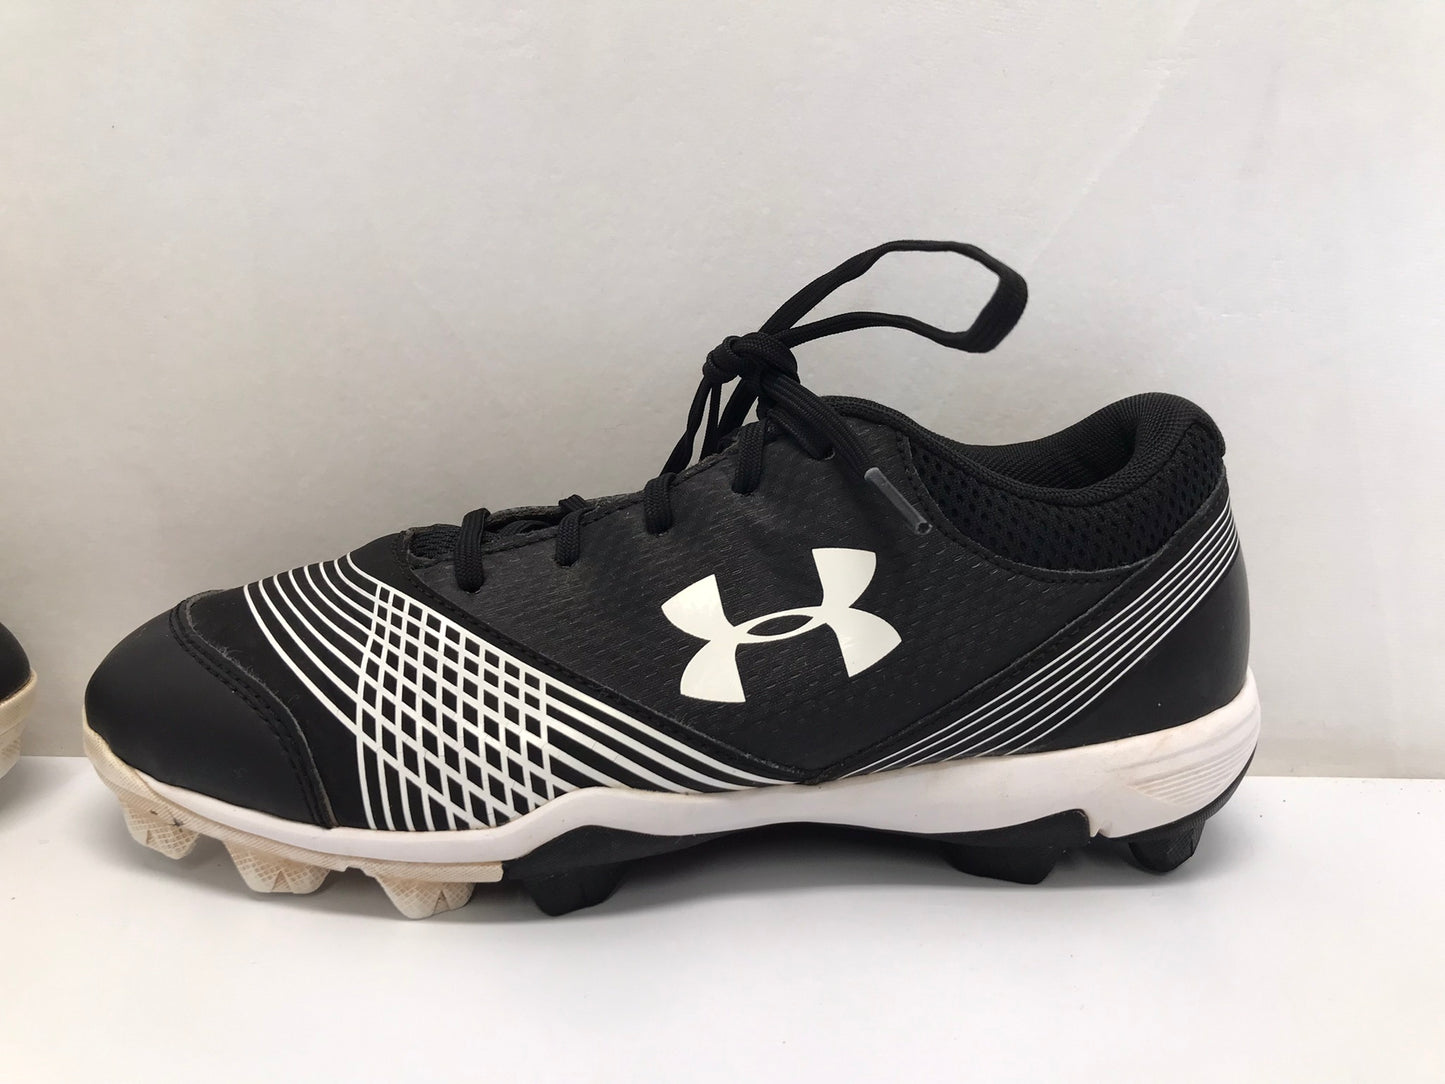 Baseball Shoes Cleats Men's Size 8 Under Armour Black White Grey